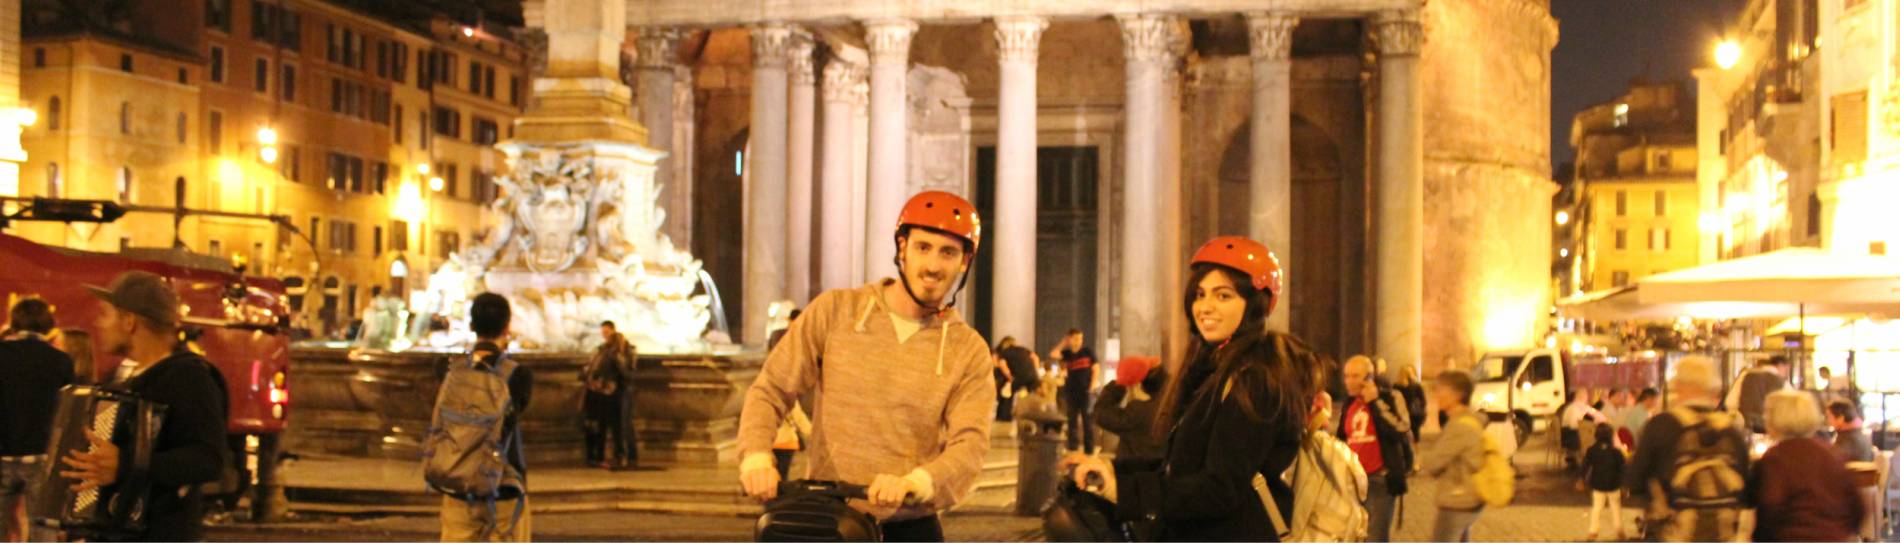 SEGWAY TOUR BY NIGHT ROME